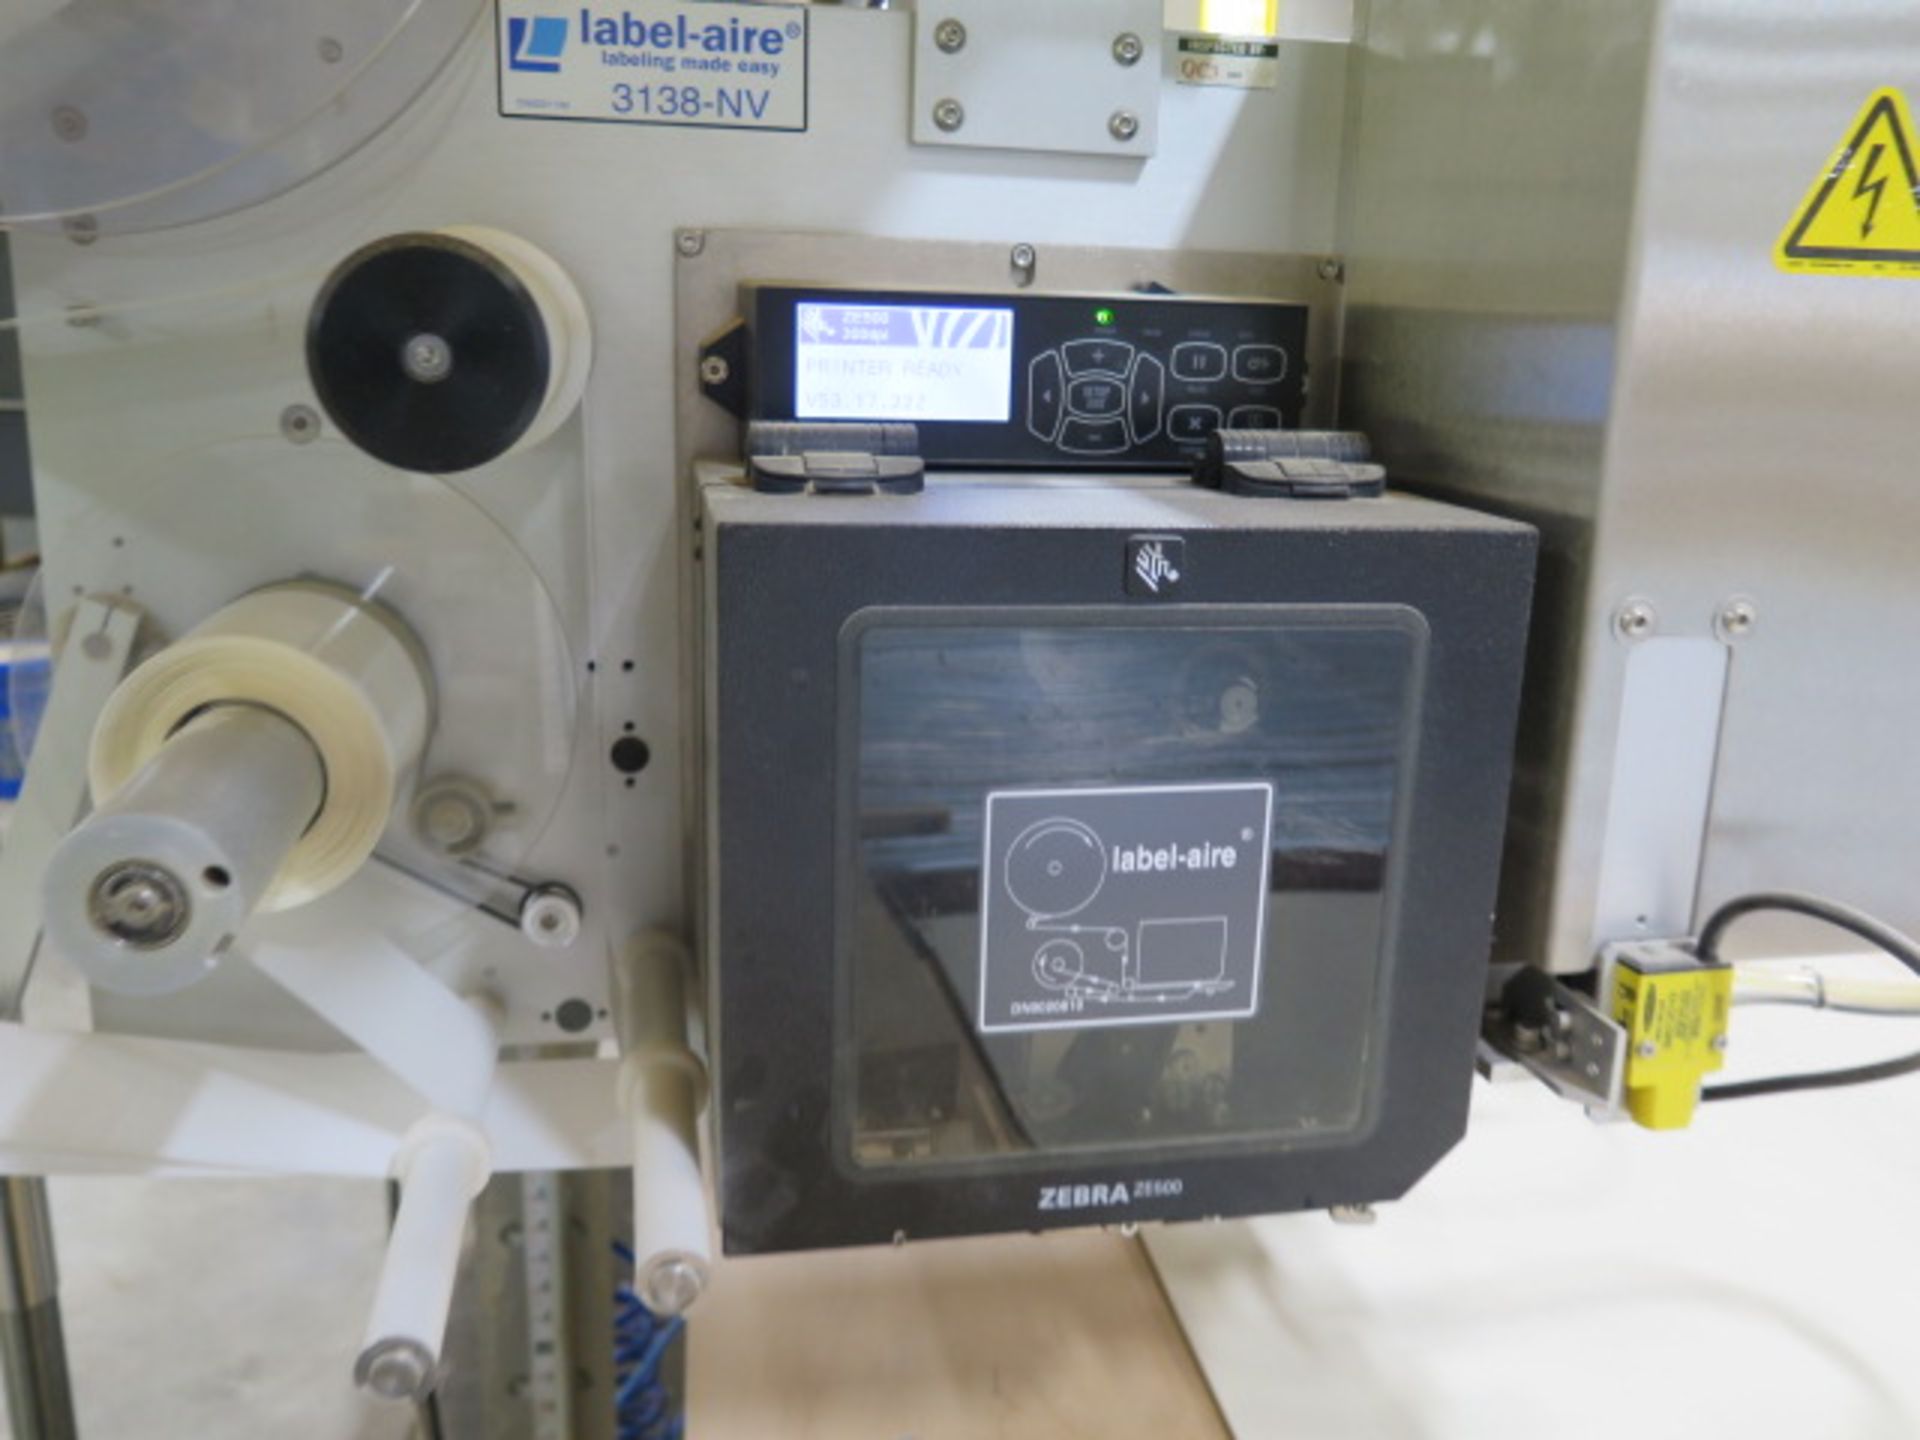 Custom Automatic Parts Labeling System w/ Label-Aire 3138NV-TBZE 534 RH E.TMP 6”ST Label, SOLD AS IS - Image 10 of 11